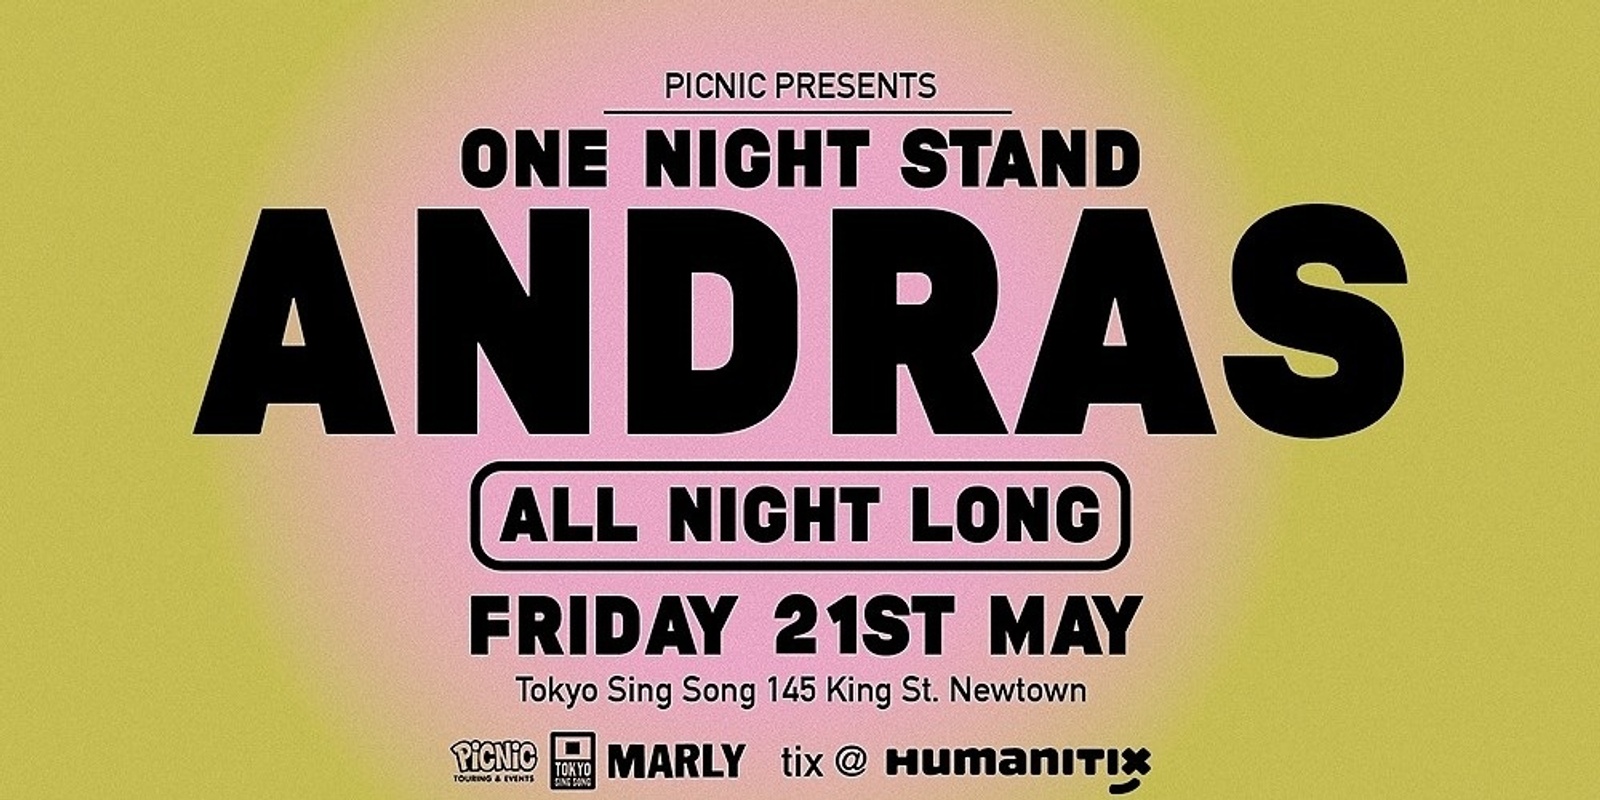 Banner image for Picnic One Night Stand | Andras - Tickets available on the door at 9pm 